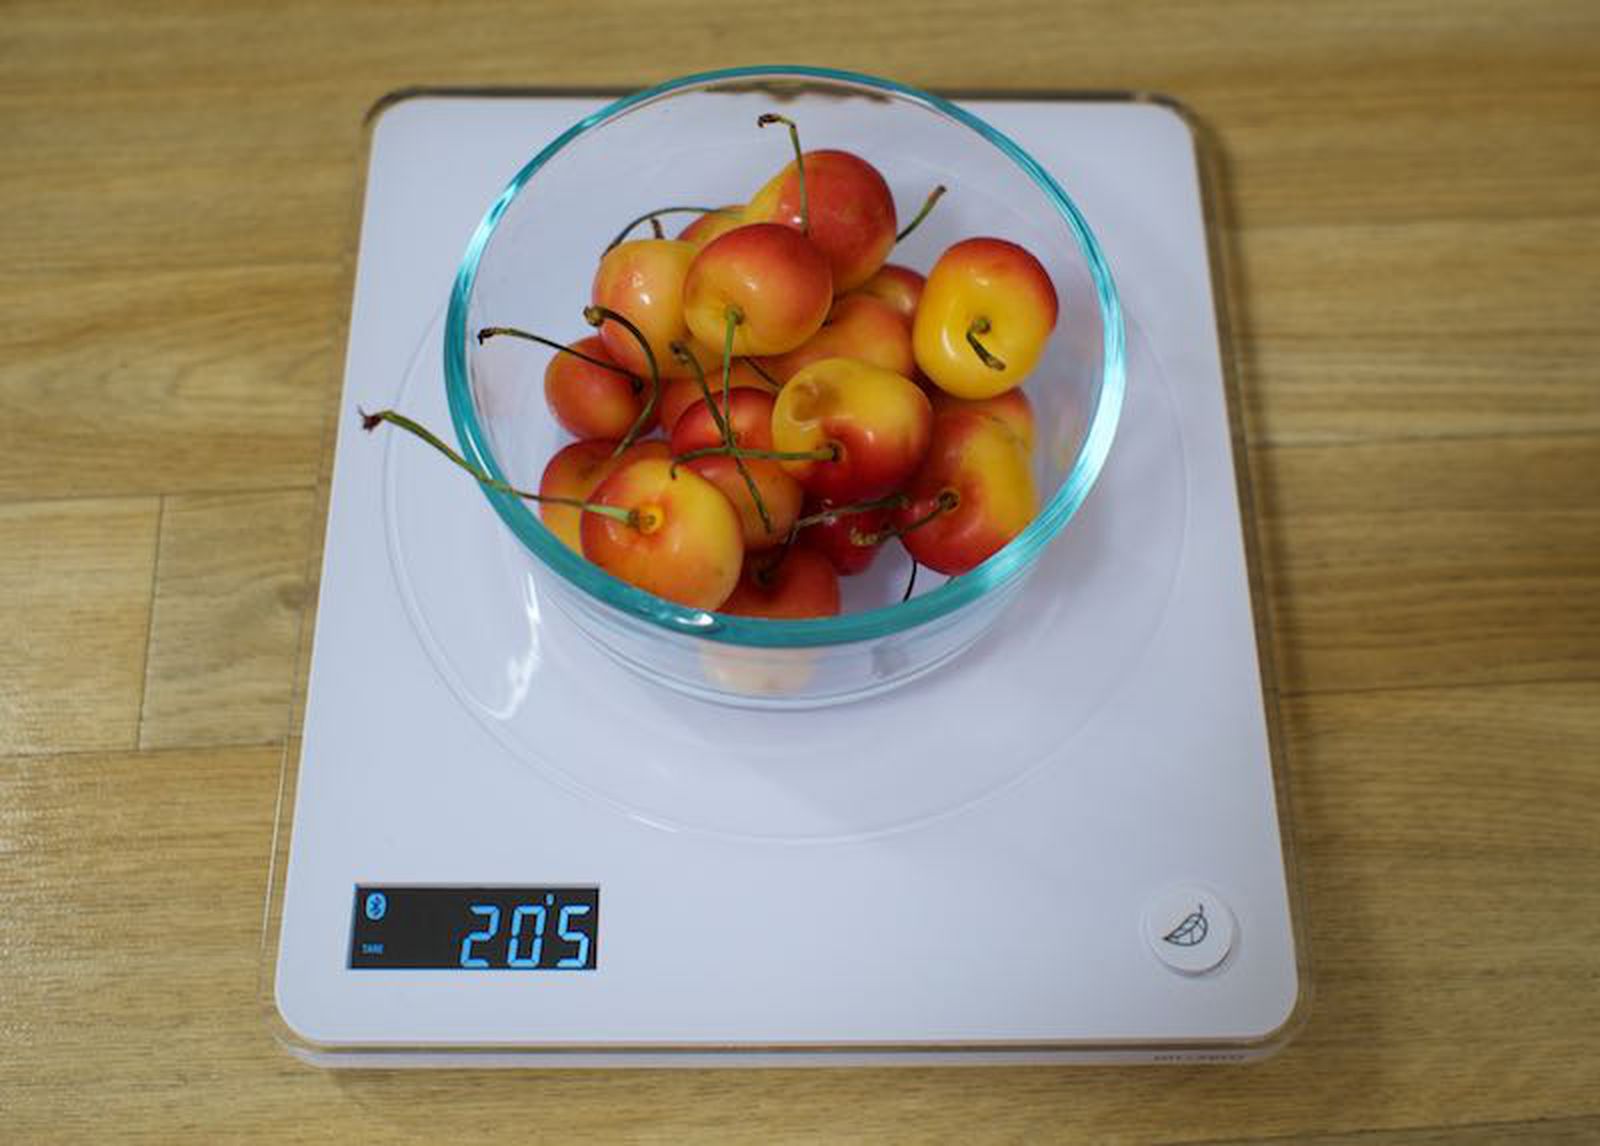 smart eating with myfitnesspal - smart kitchen scale - Smart Food Scale